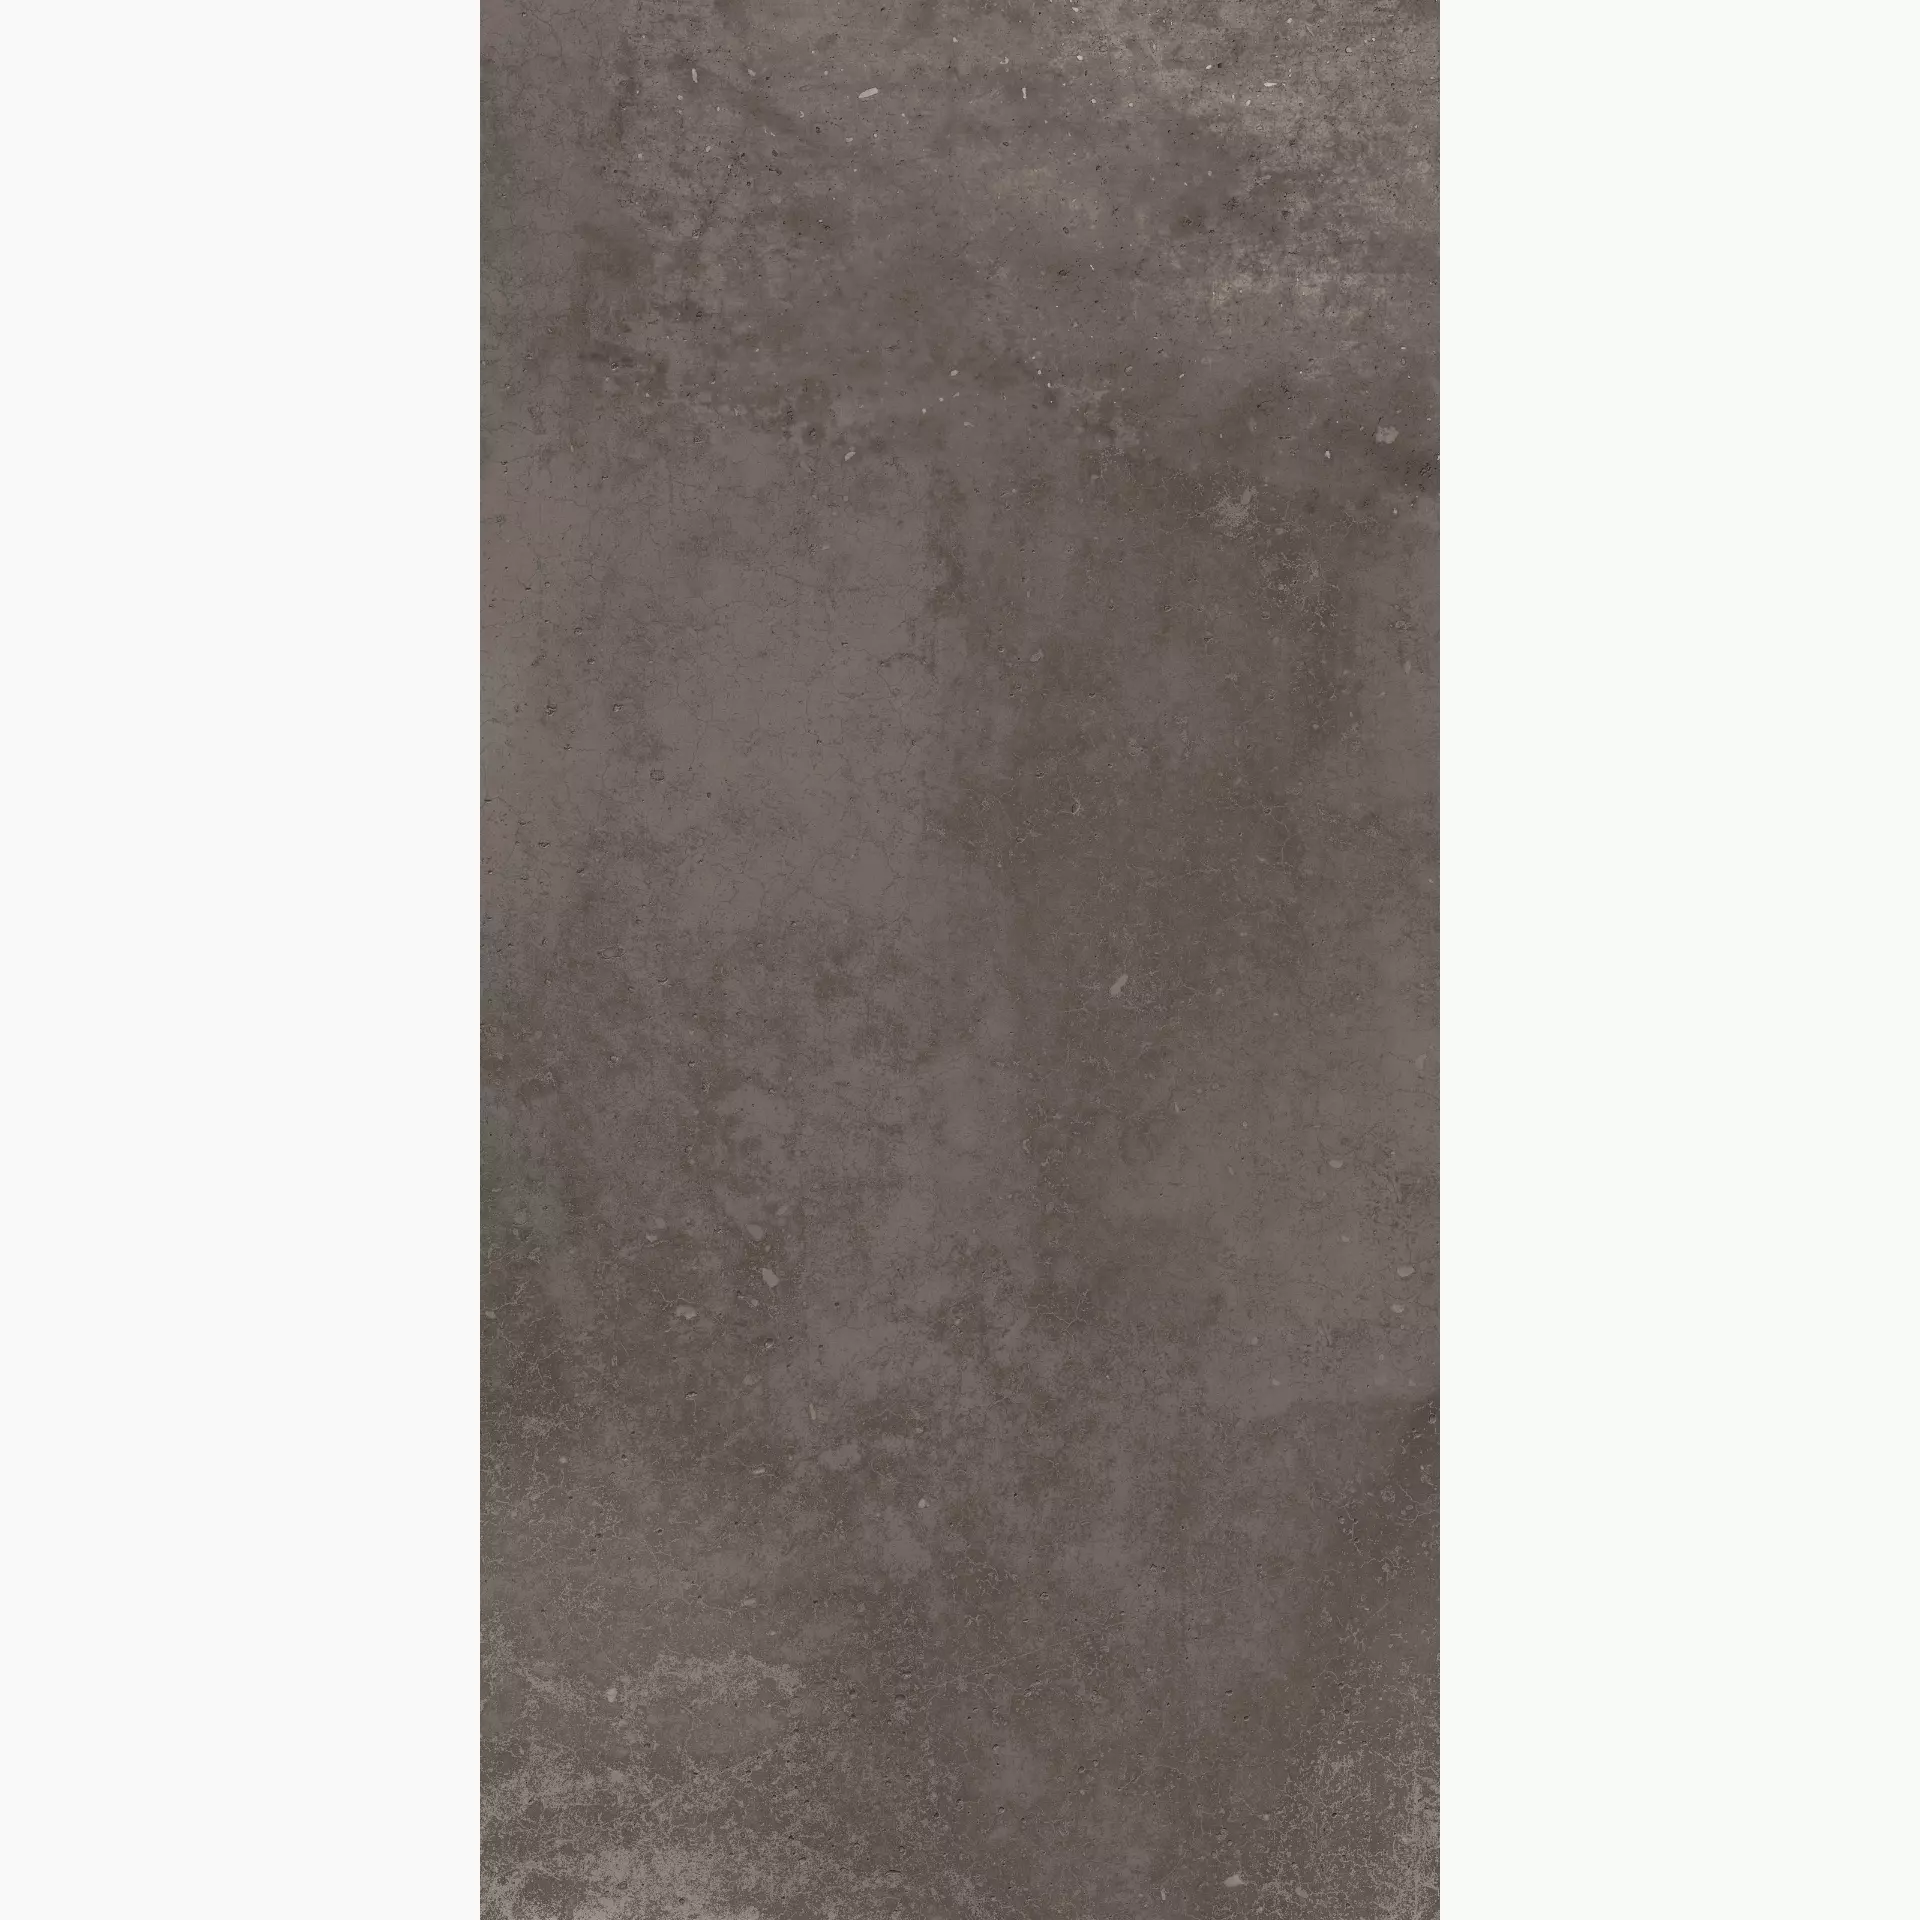 Flaviker X20 Taupe Outdoor Hyper PF60002772 60x120cm rectified 20mm